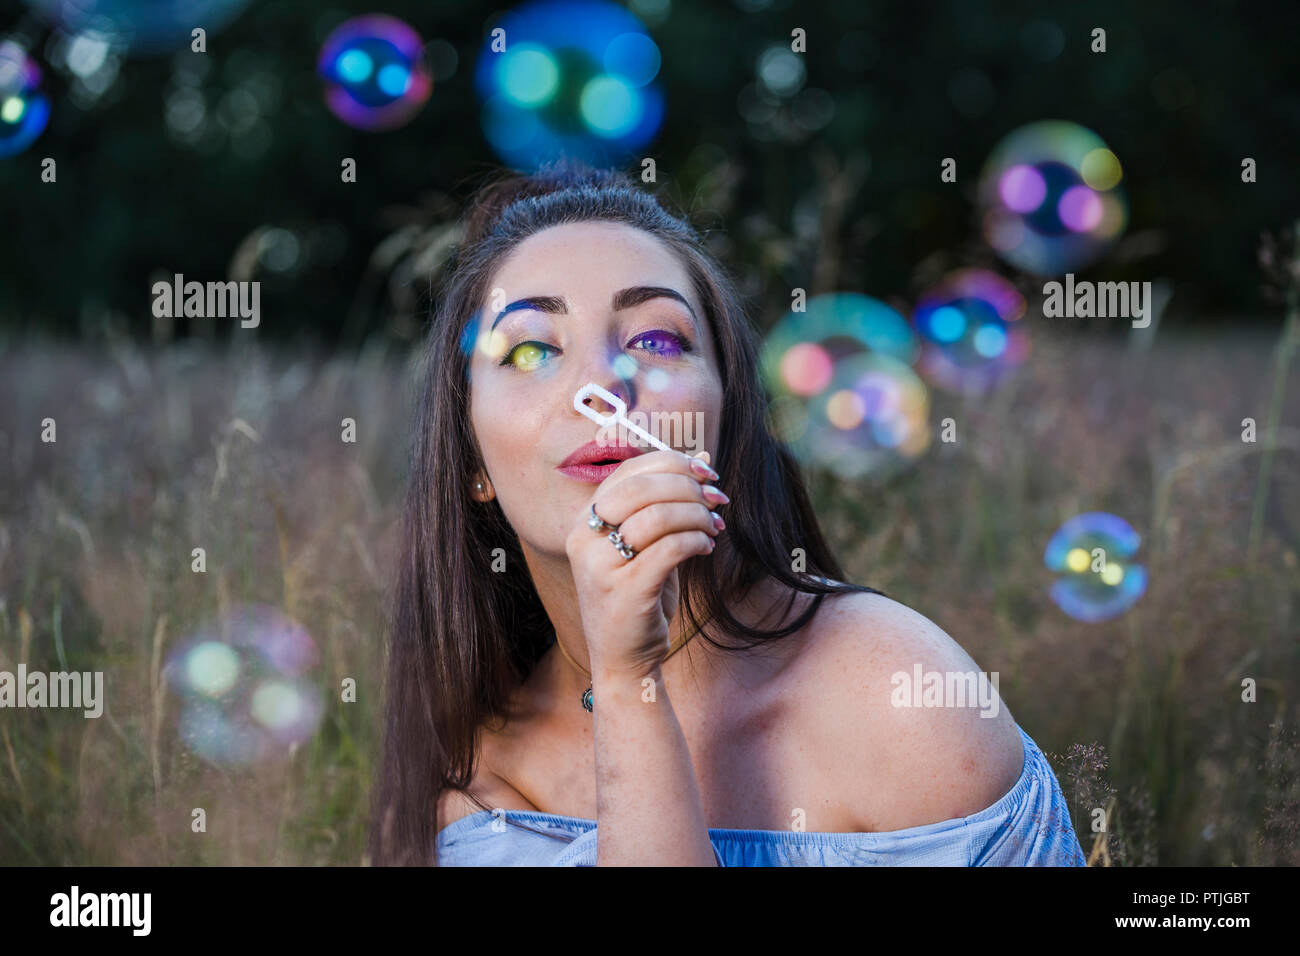 A young woman blows bubbles towards the camera in a meadow. Stock Photo